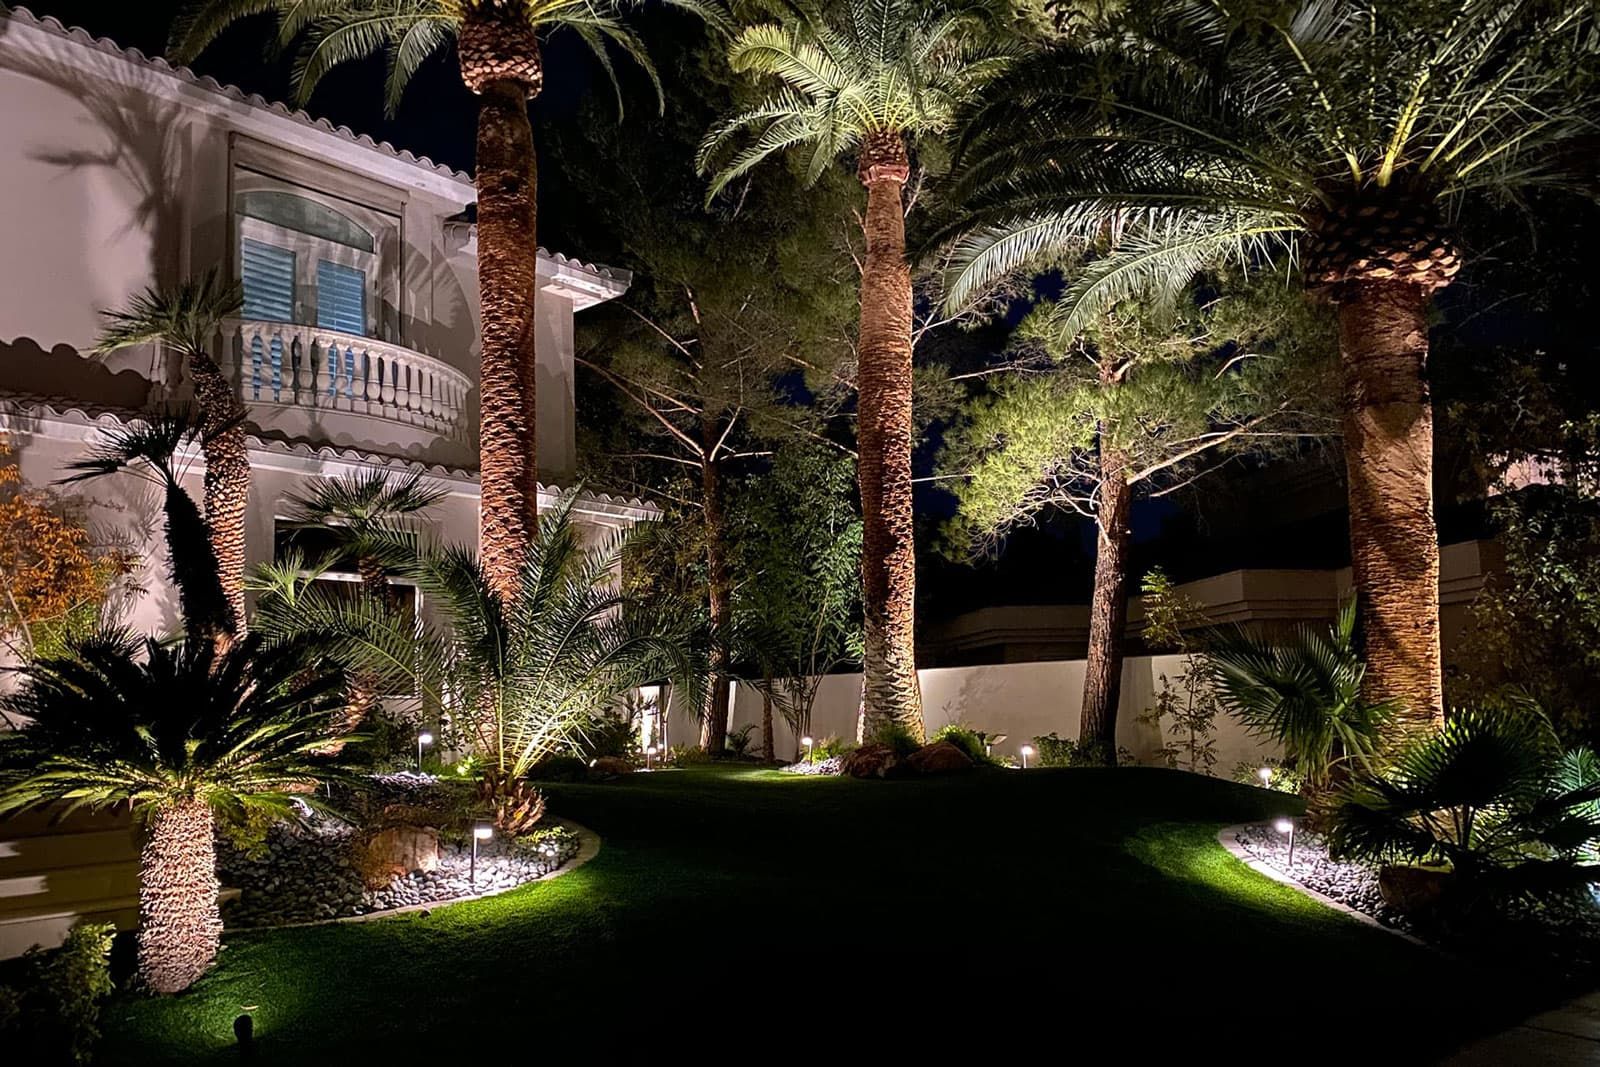 A Las Vegas Home With Professional Landscaping, Including Tree Service, Artificial Turf And Outdoor Lighting.